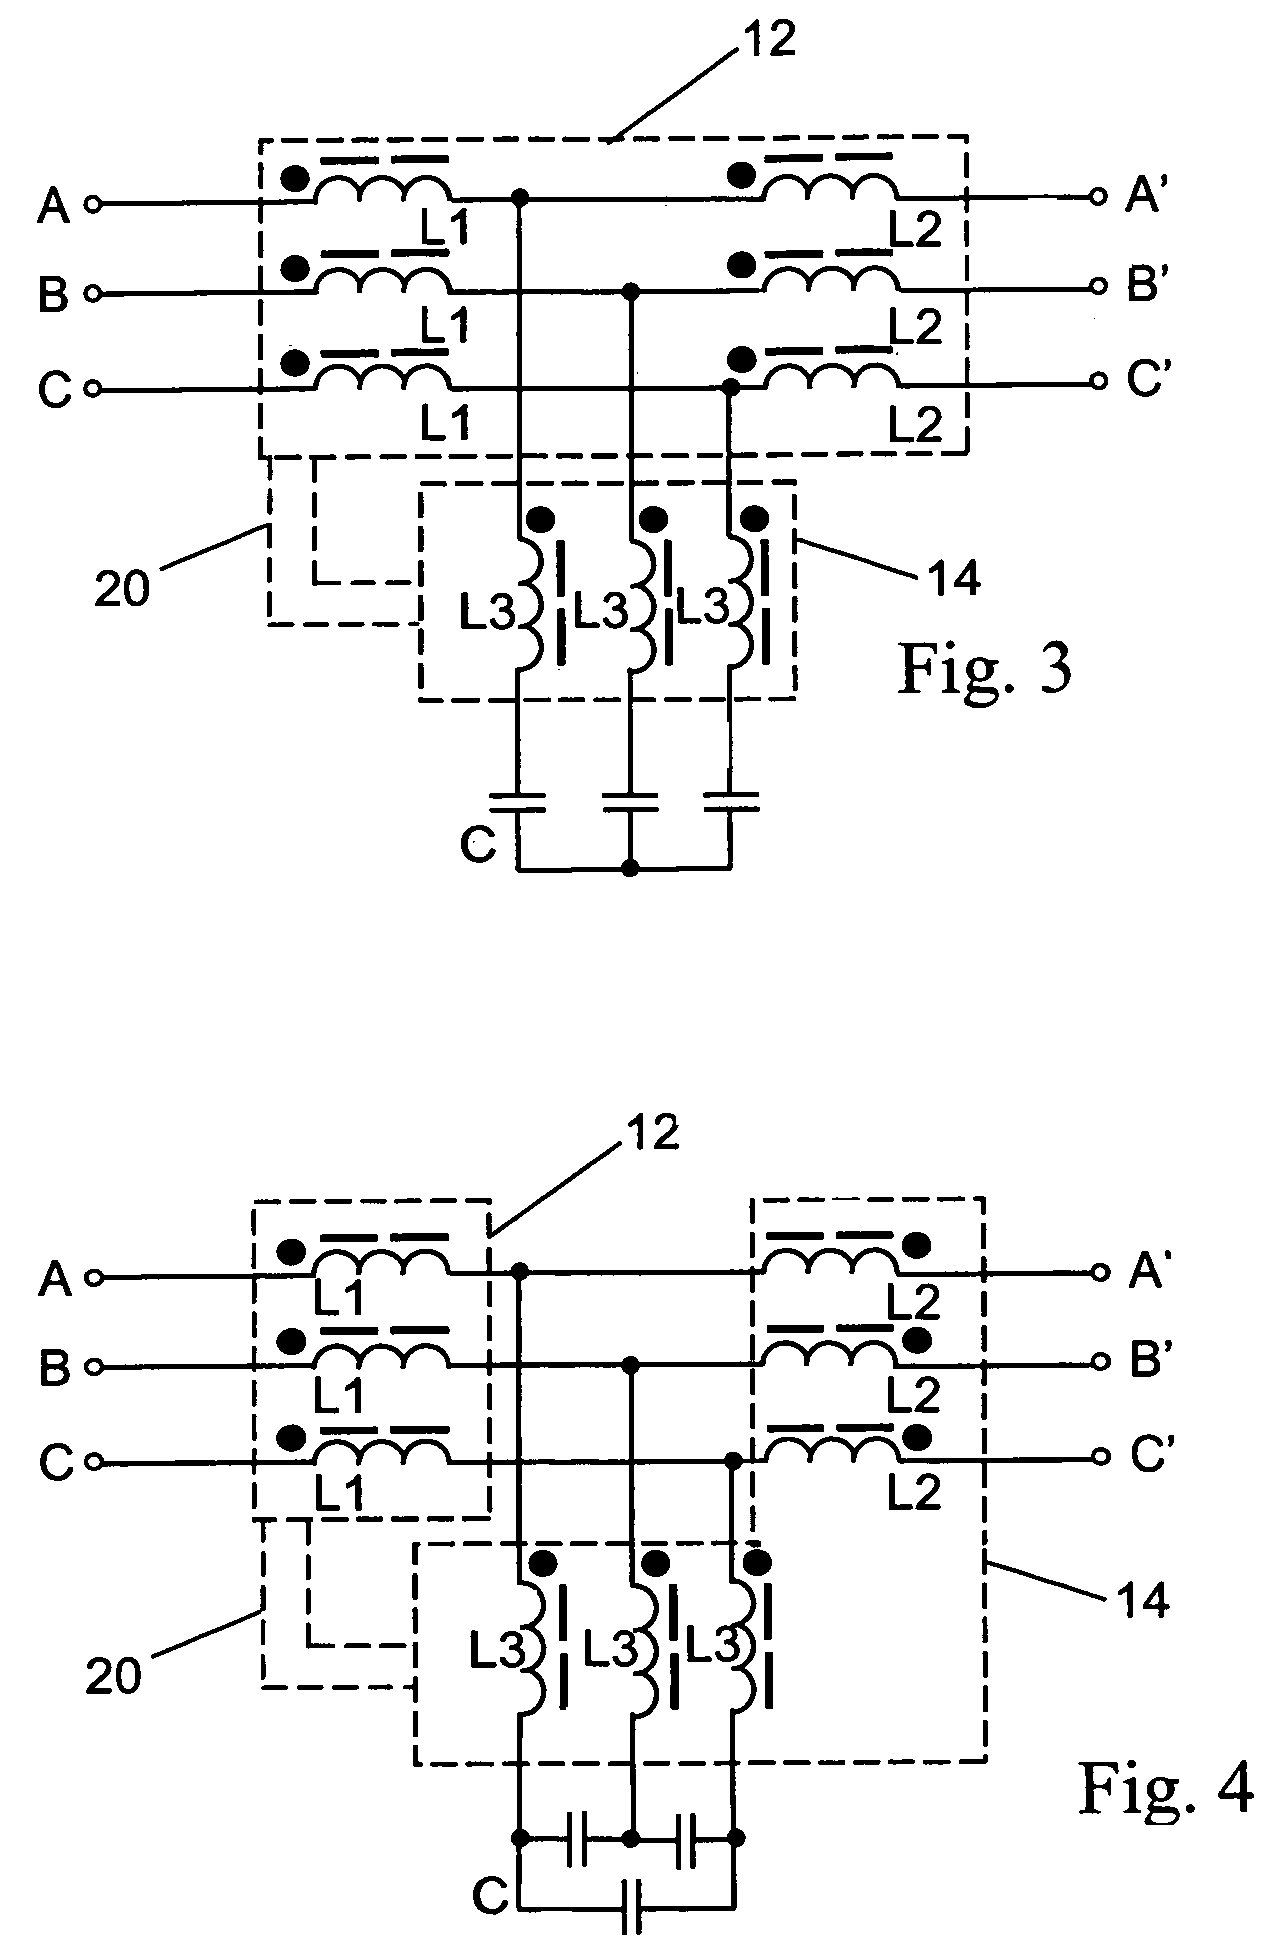 Harmonic mitigating device with magnetic shunt